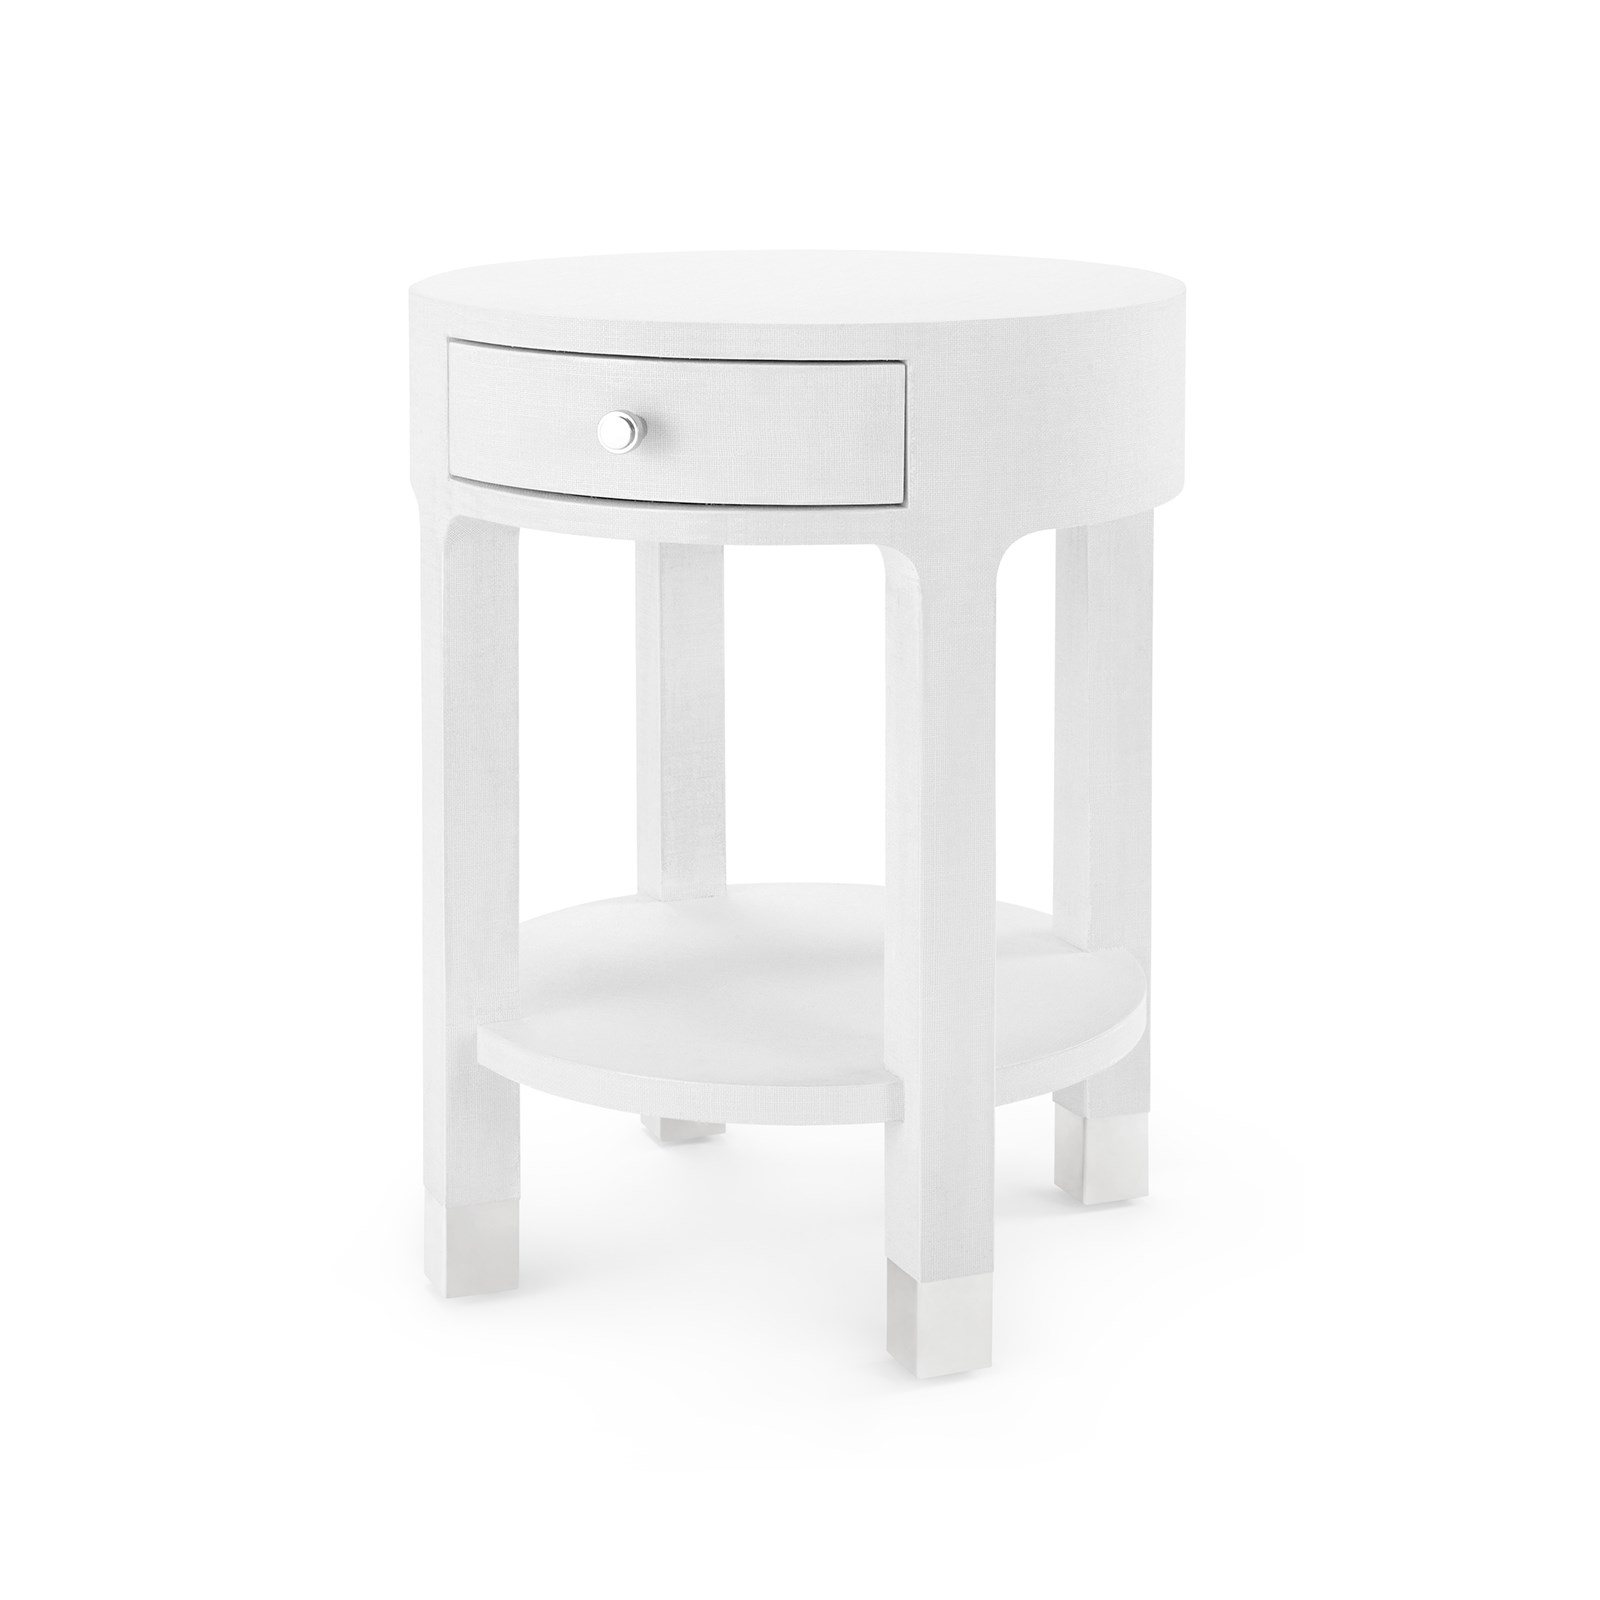 white round side table turesboss dakota neelan accent modclair tables drawer patio umbrella weights small farmhouse dining oval fall tablecloths garden luxury room furniture